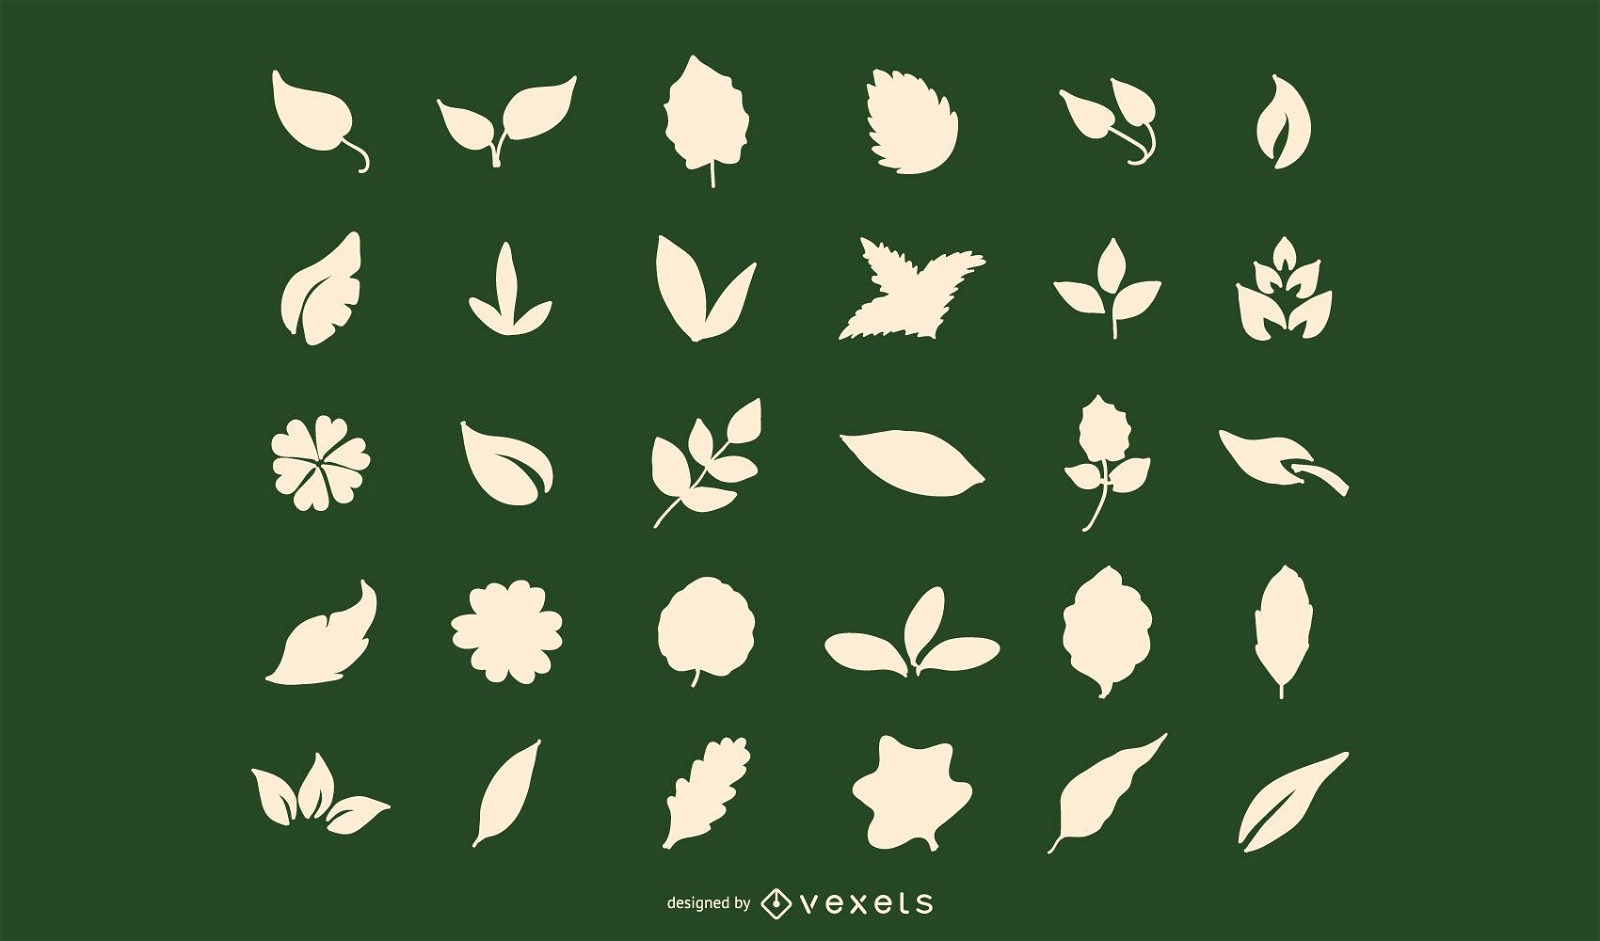 Leaf Shapes Silhouette Vector